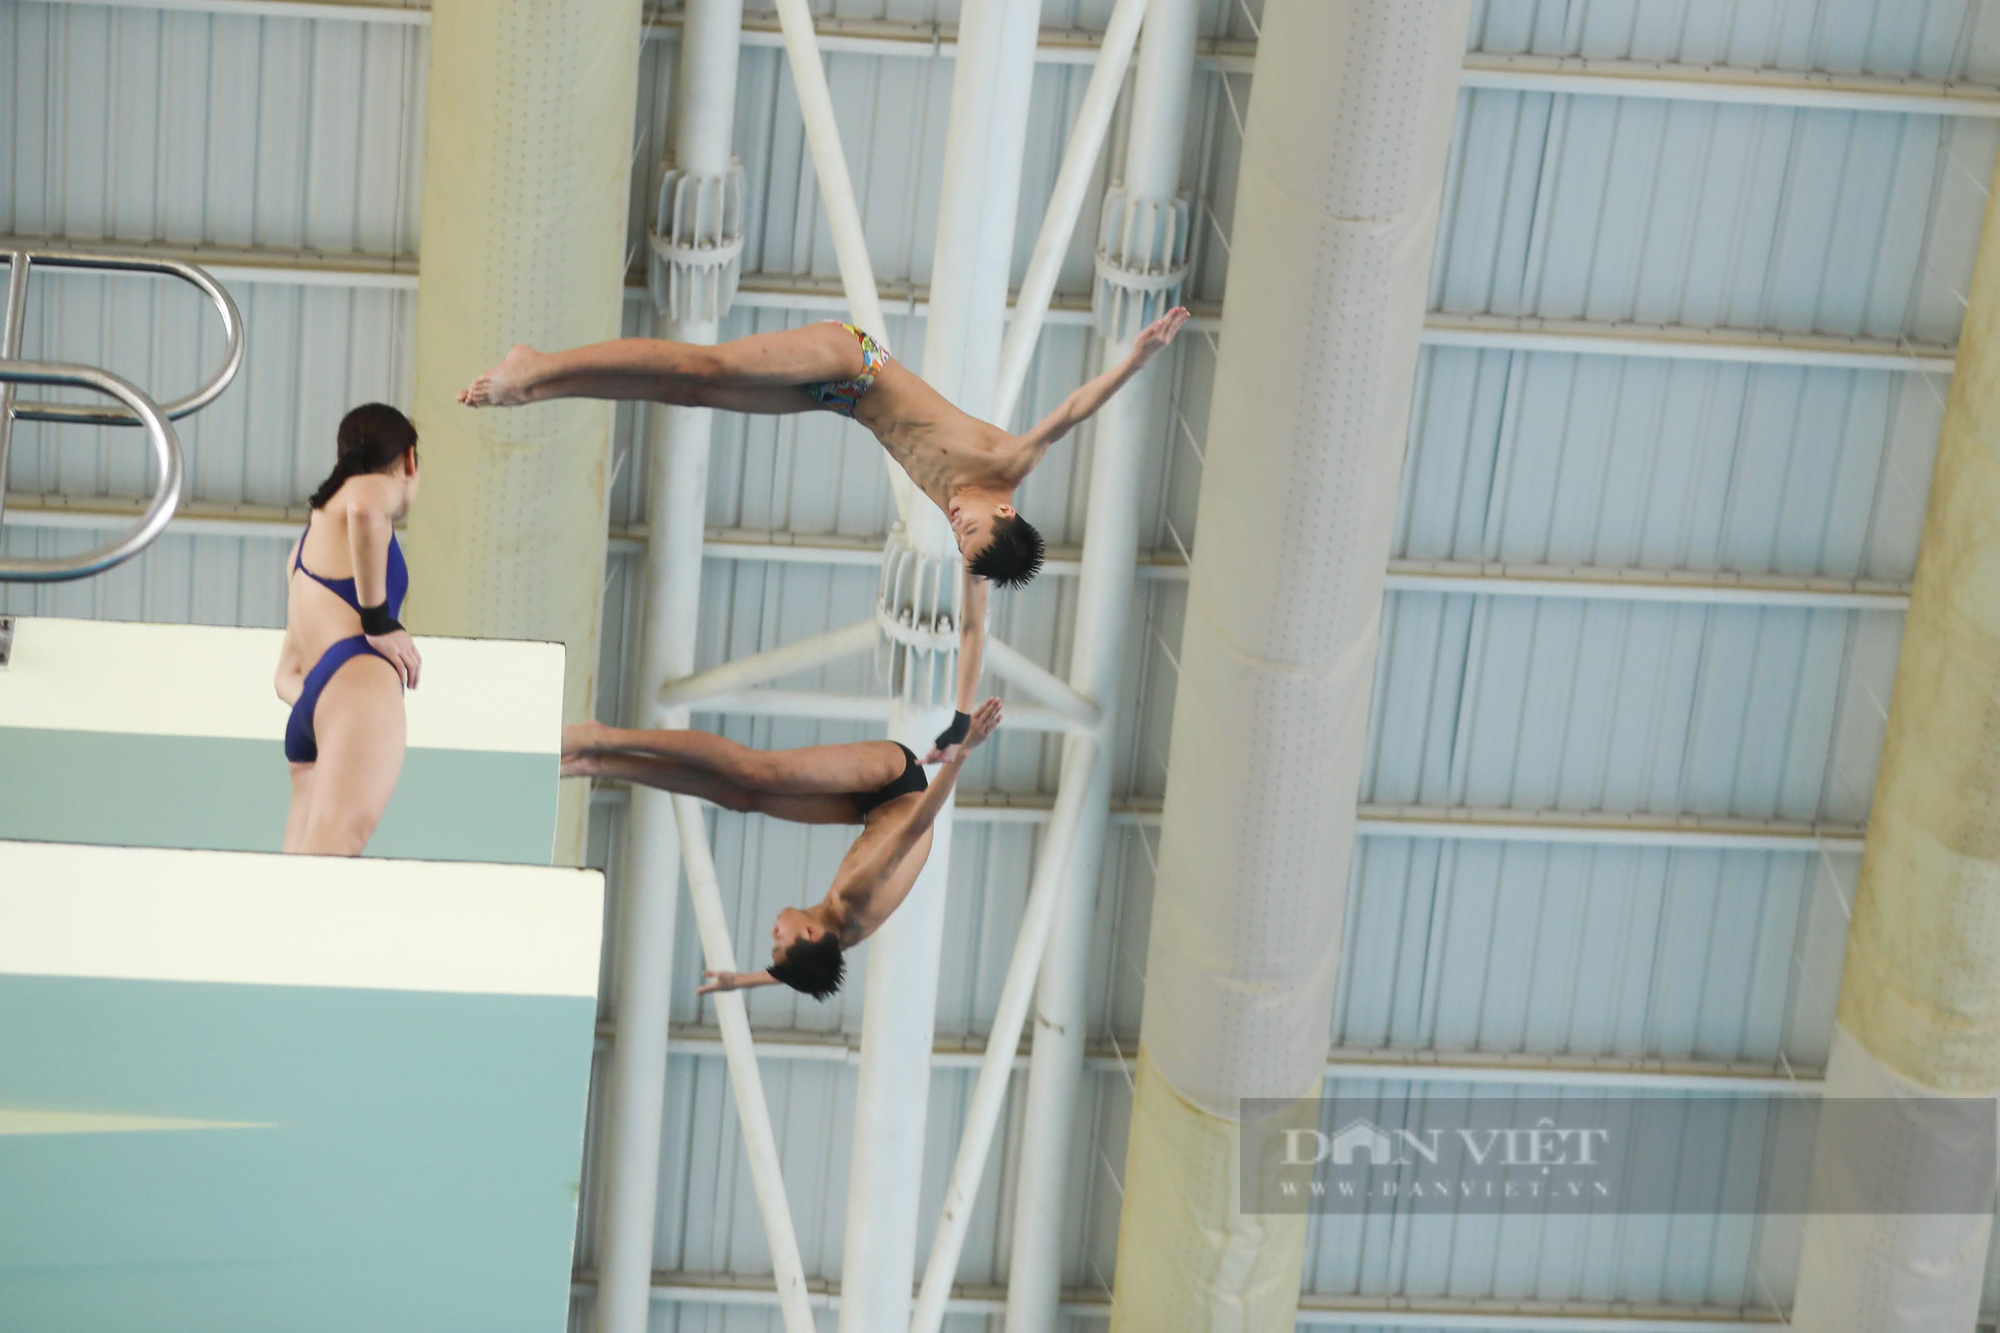 Watch with your own eyes the Vietnamese diving team practice to prepare for the 31st SEA Games - Photo 2.